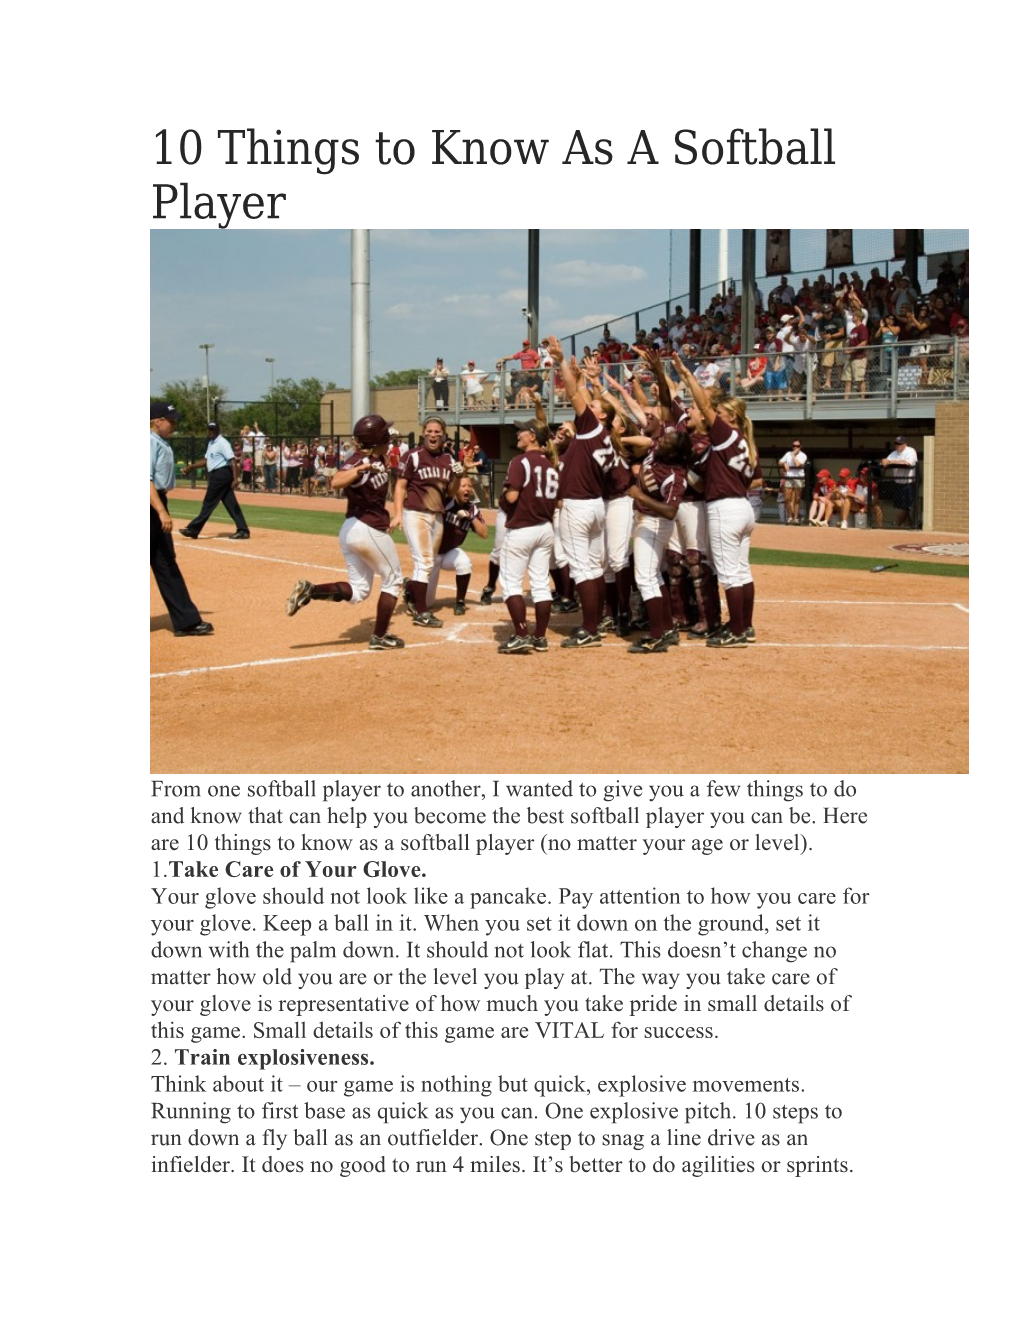 10 Things to Know As a Softball Player